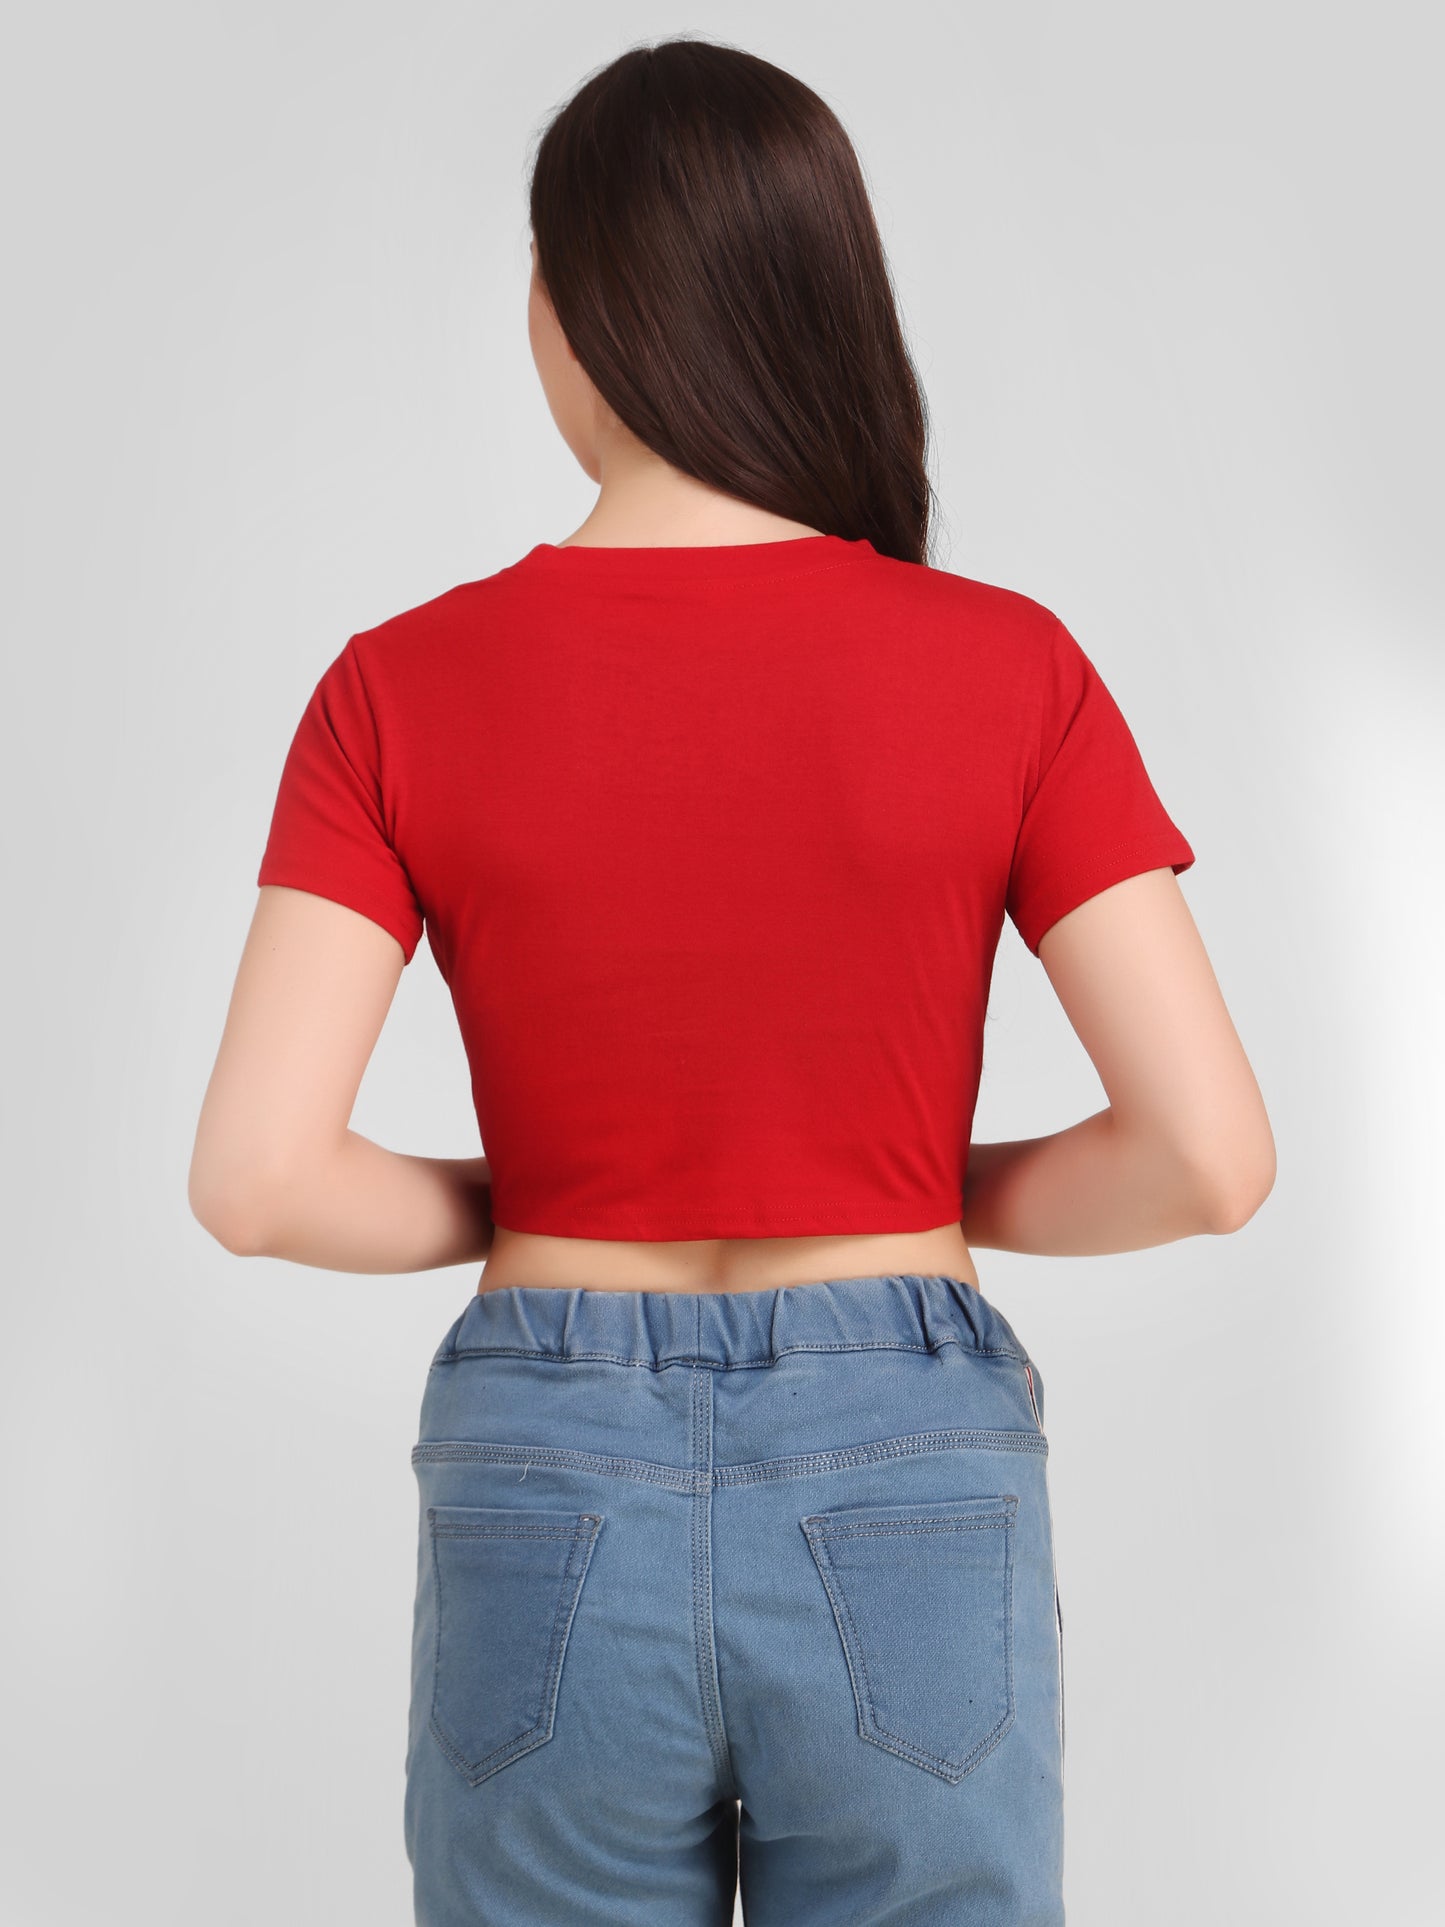 Red Coloured Meow Print Trendy Crop Top!!